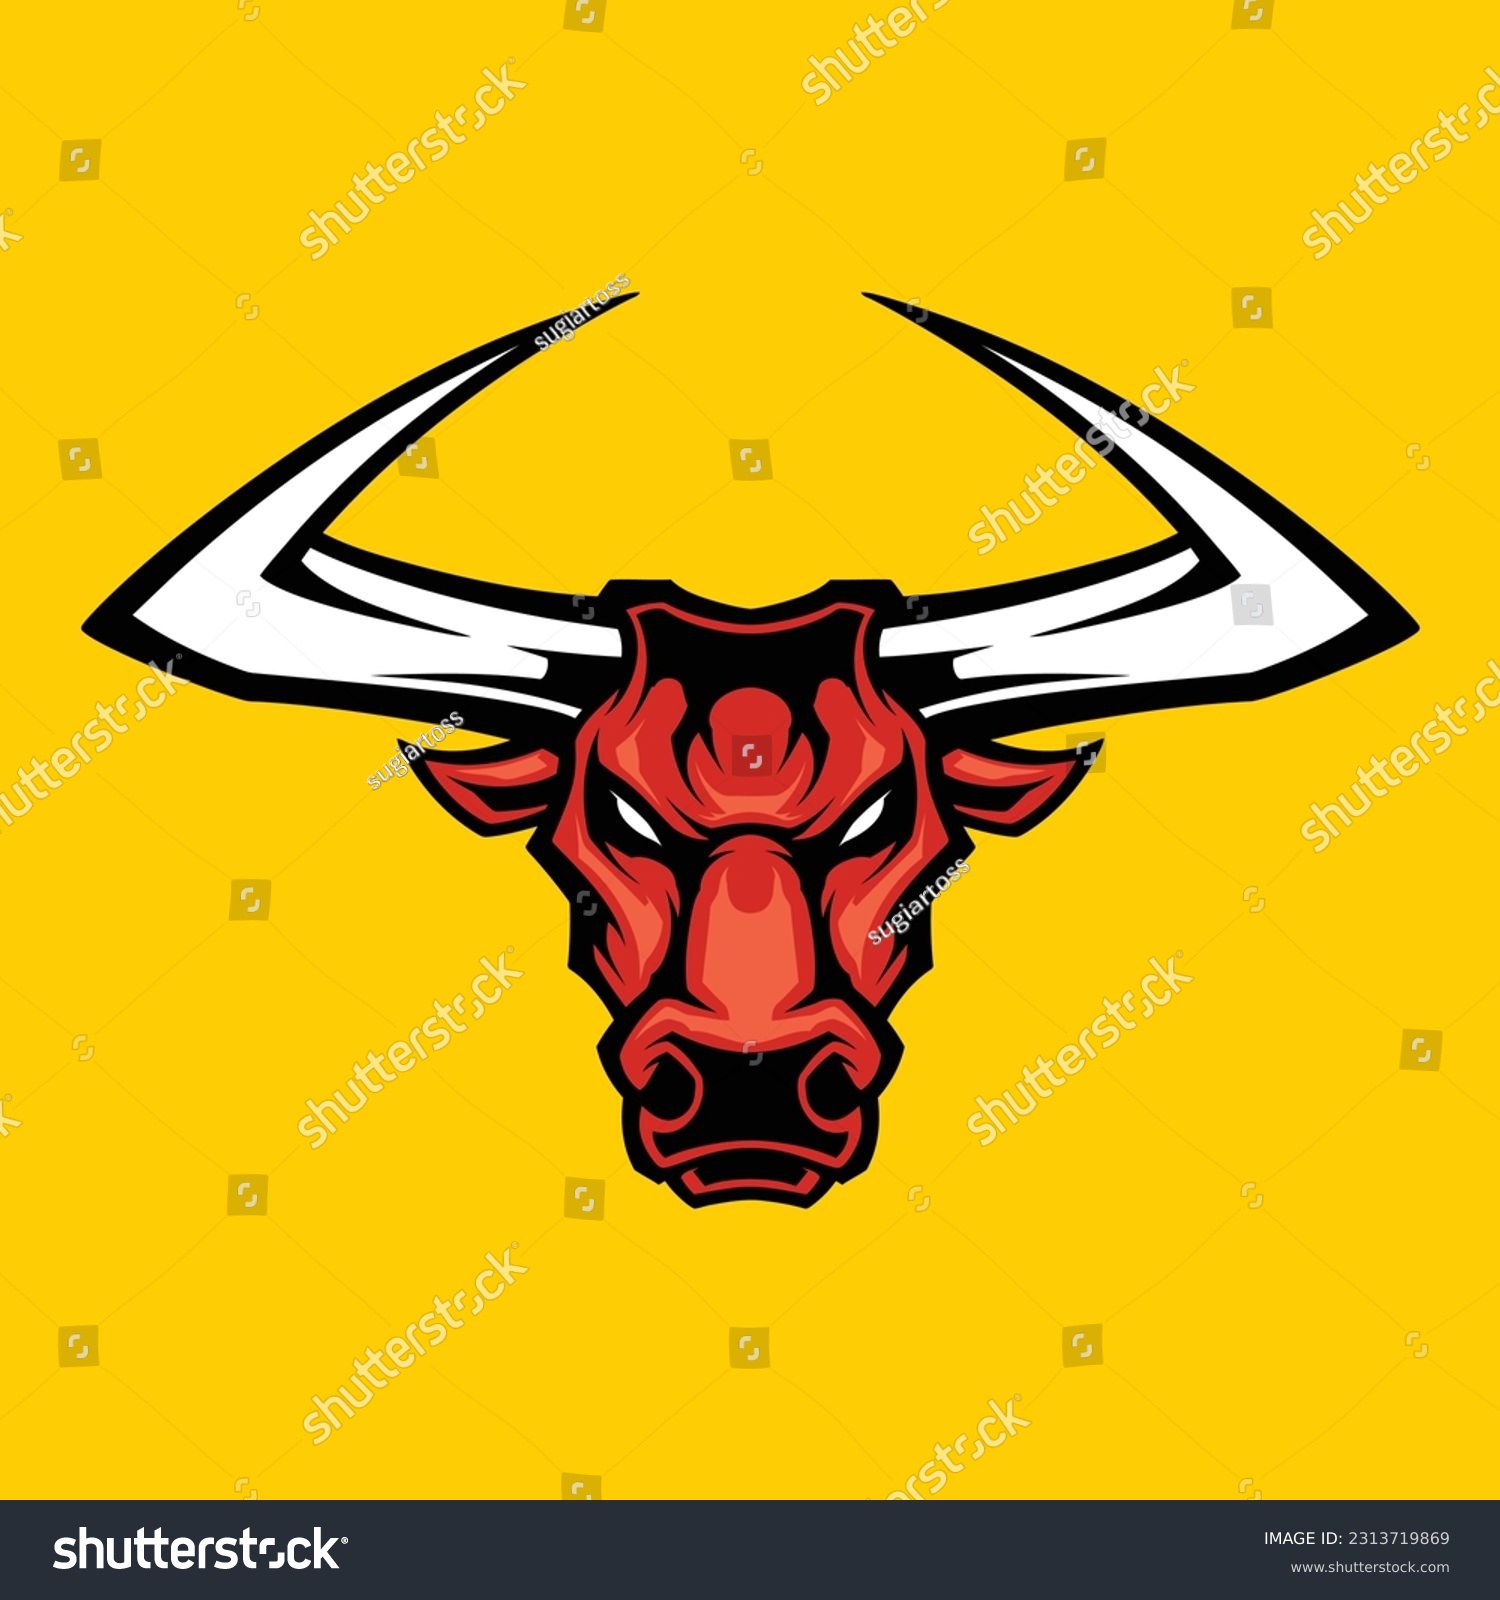 SVG of bull head vector for commercial use svg